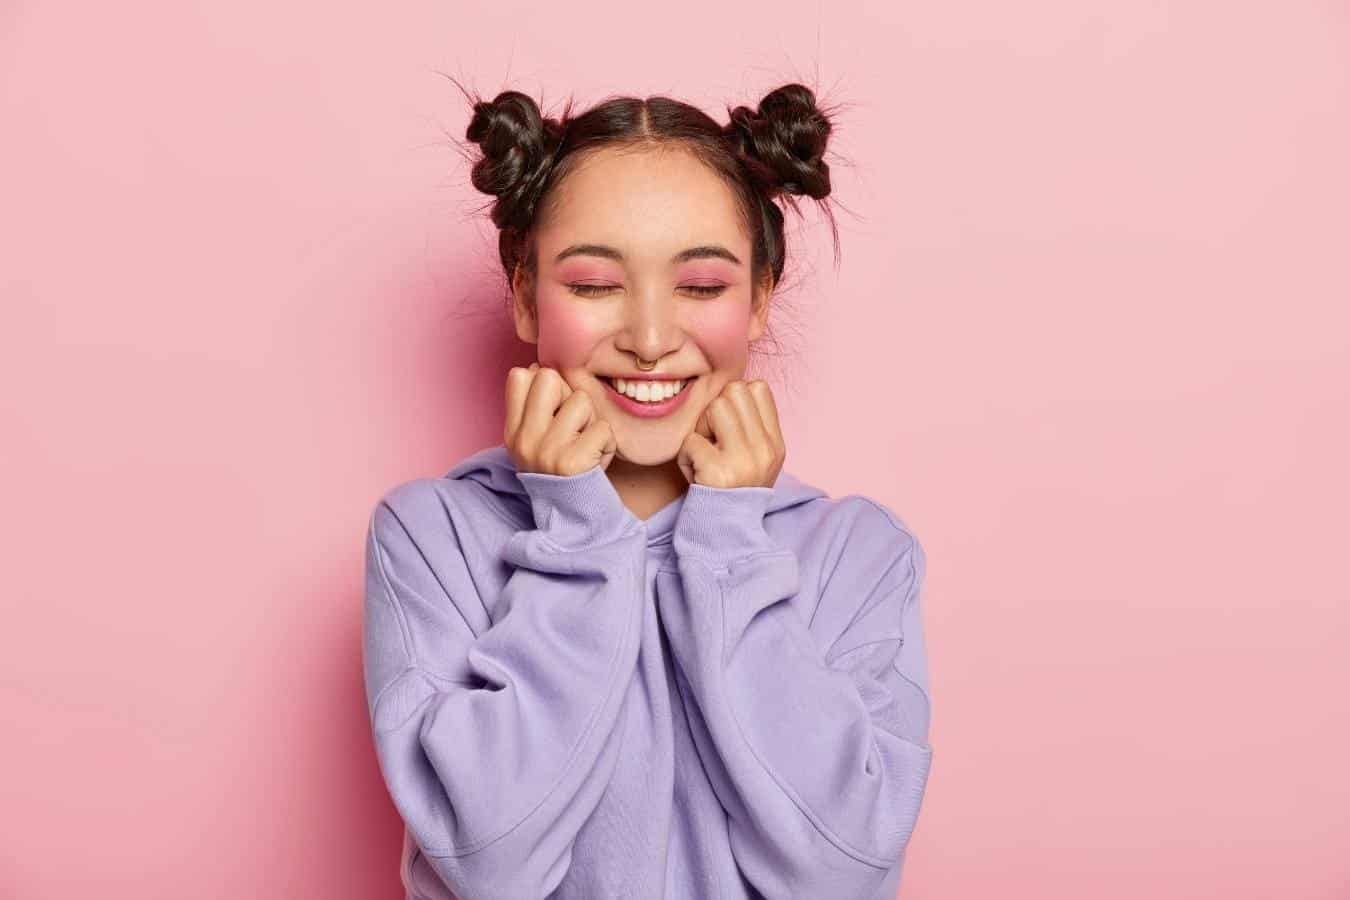 Asian girl with her hair in two buns is smiling and pinching her cheeks against a pink background.